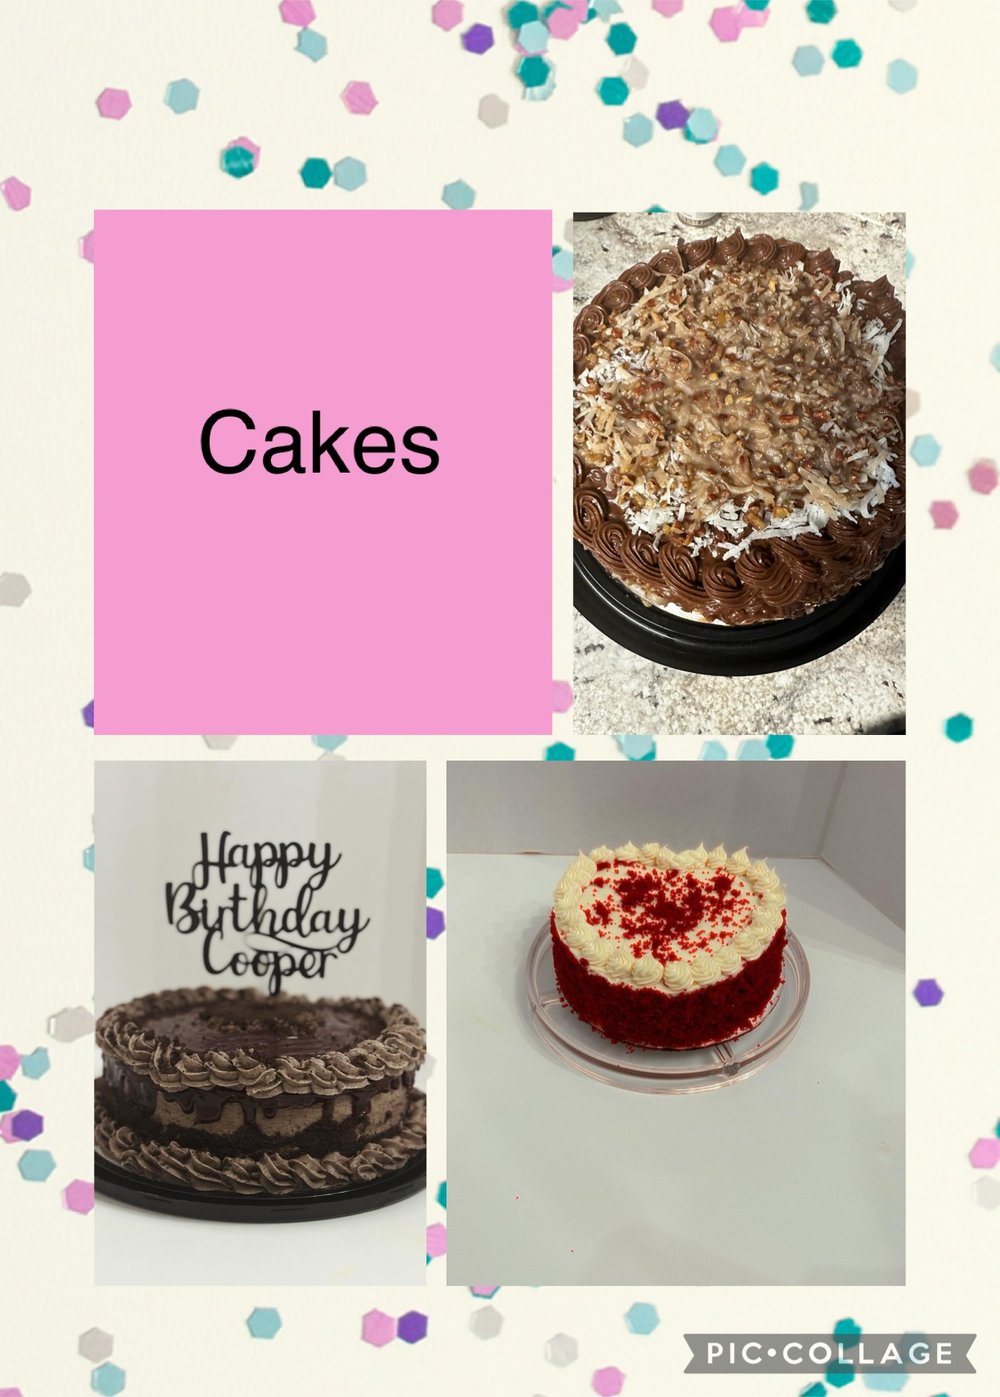 Image of Daughter’s cakes